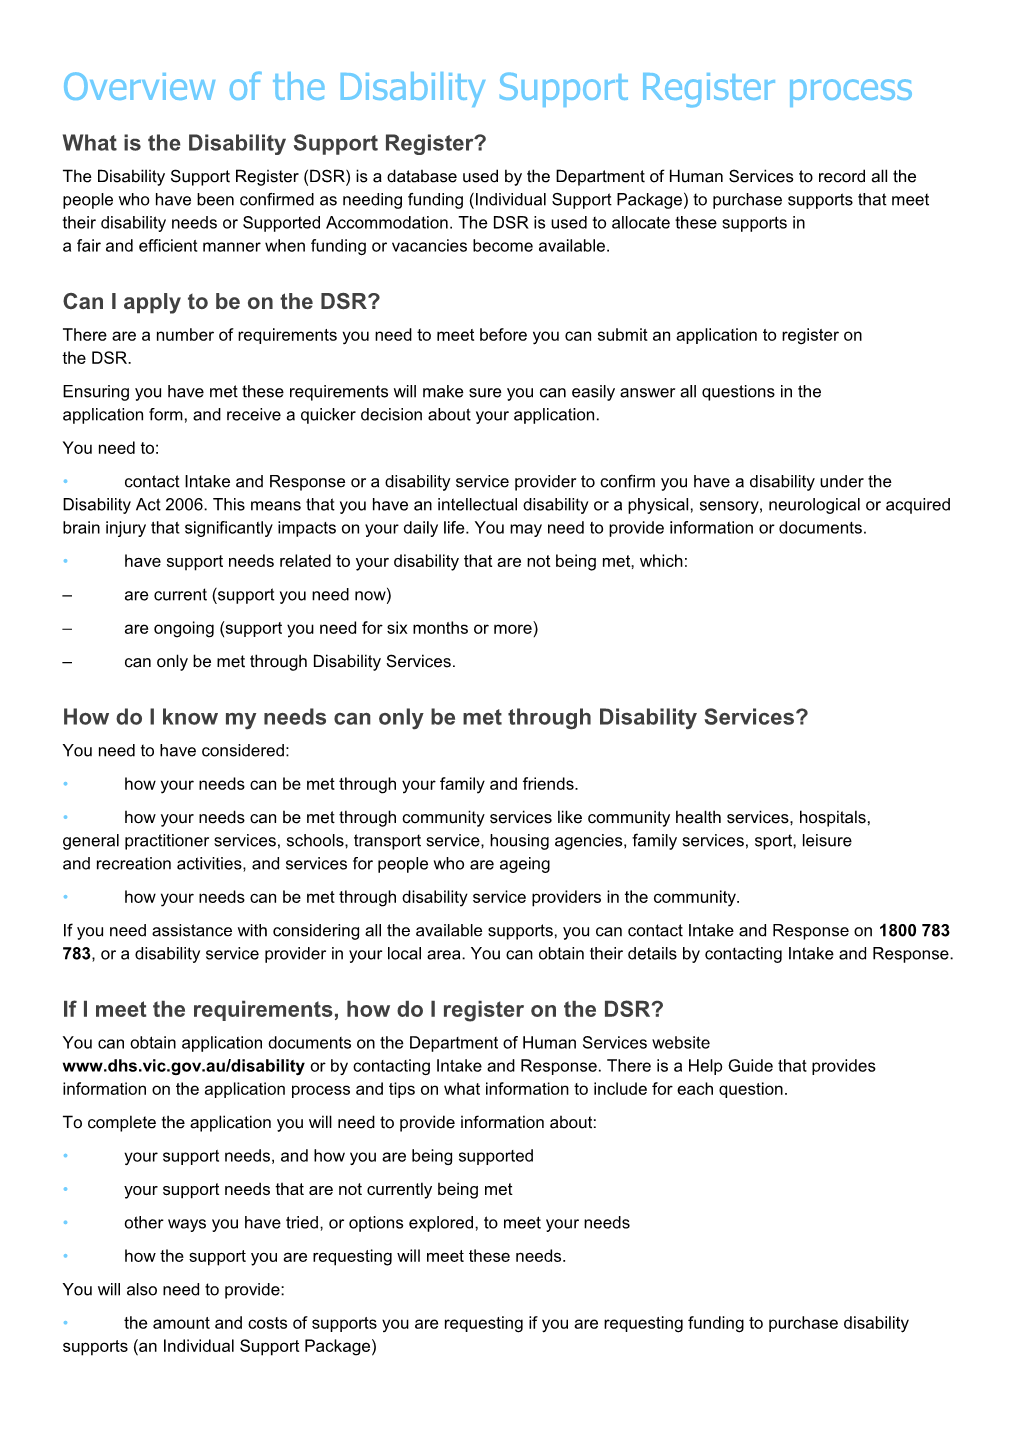 Disability Support Register Process Overview